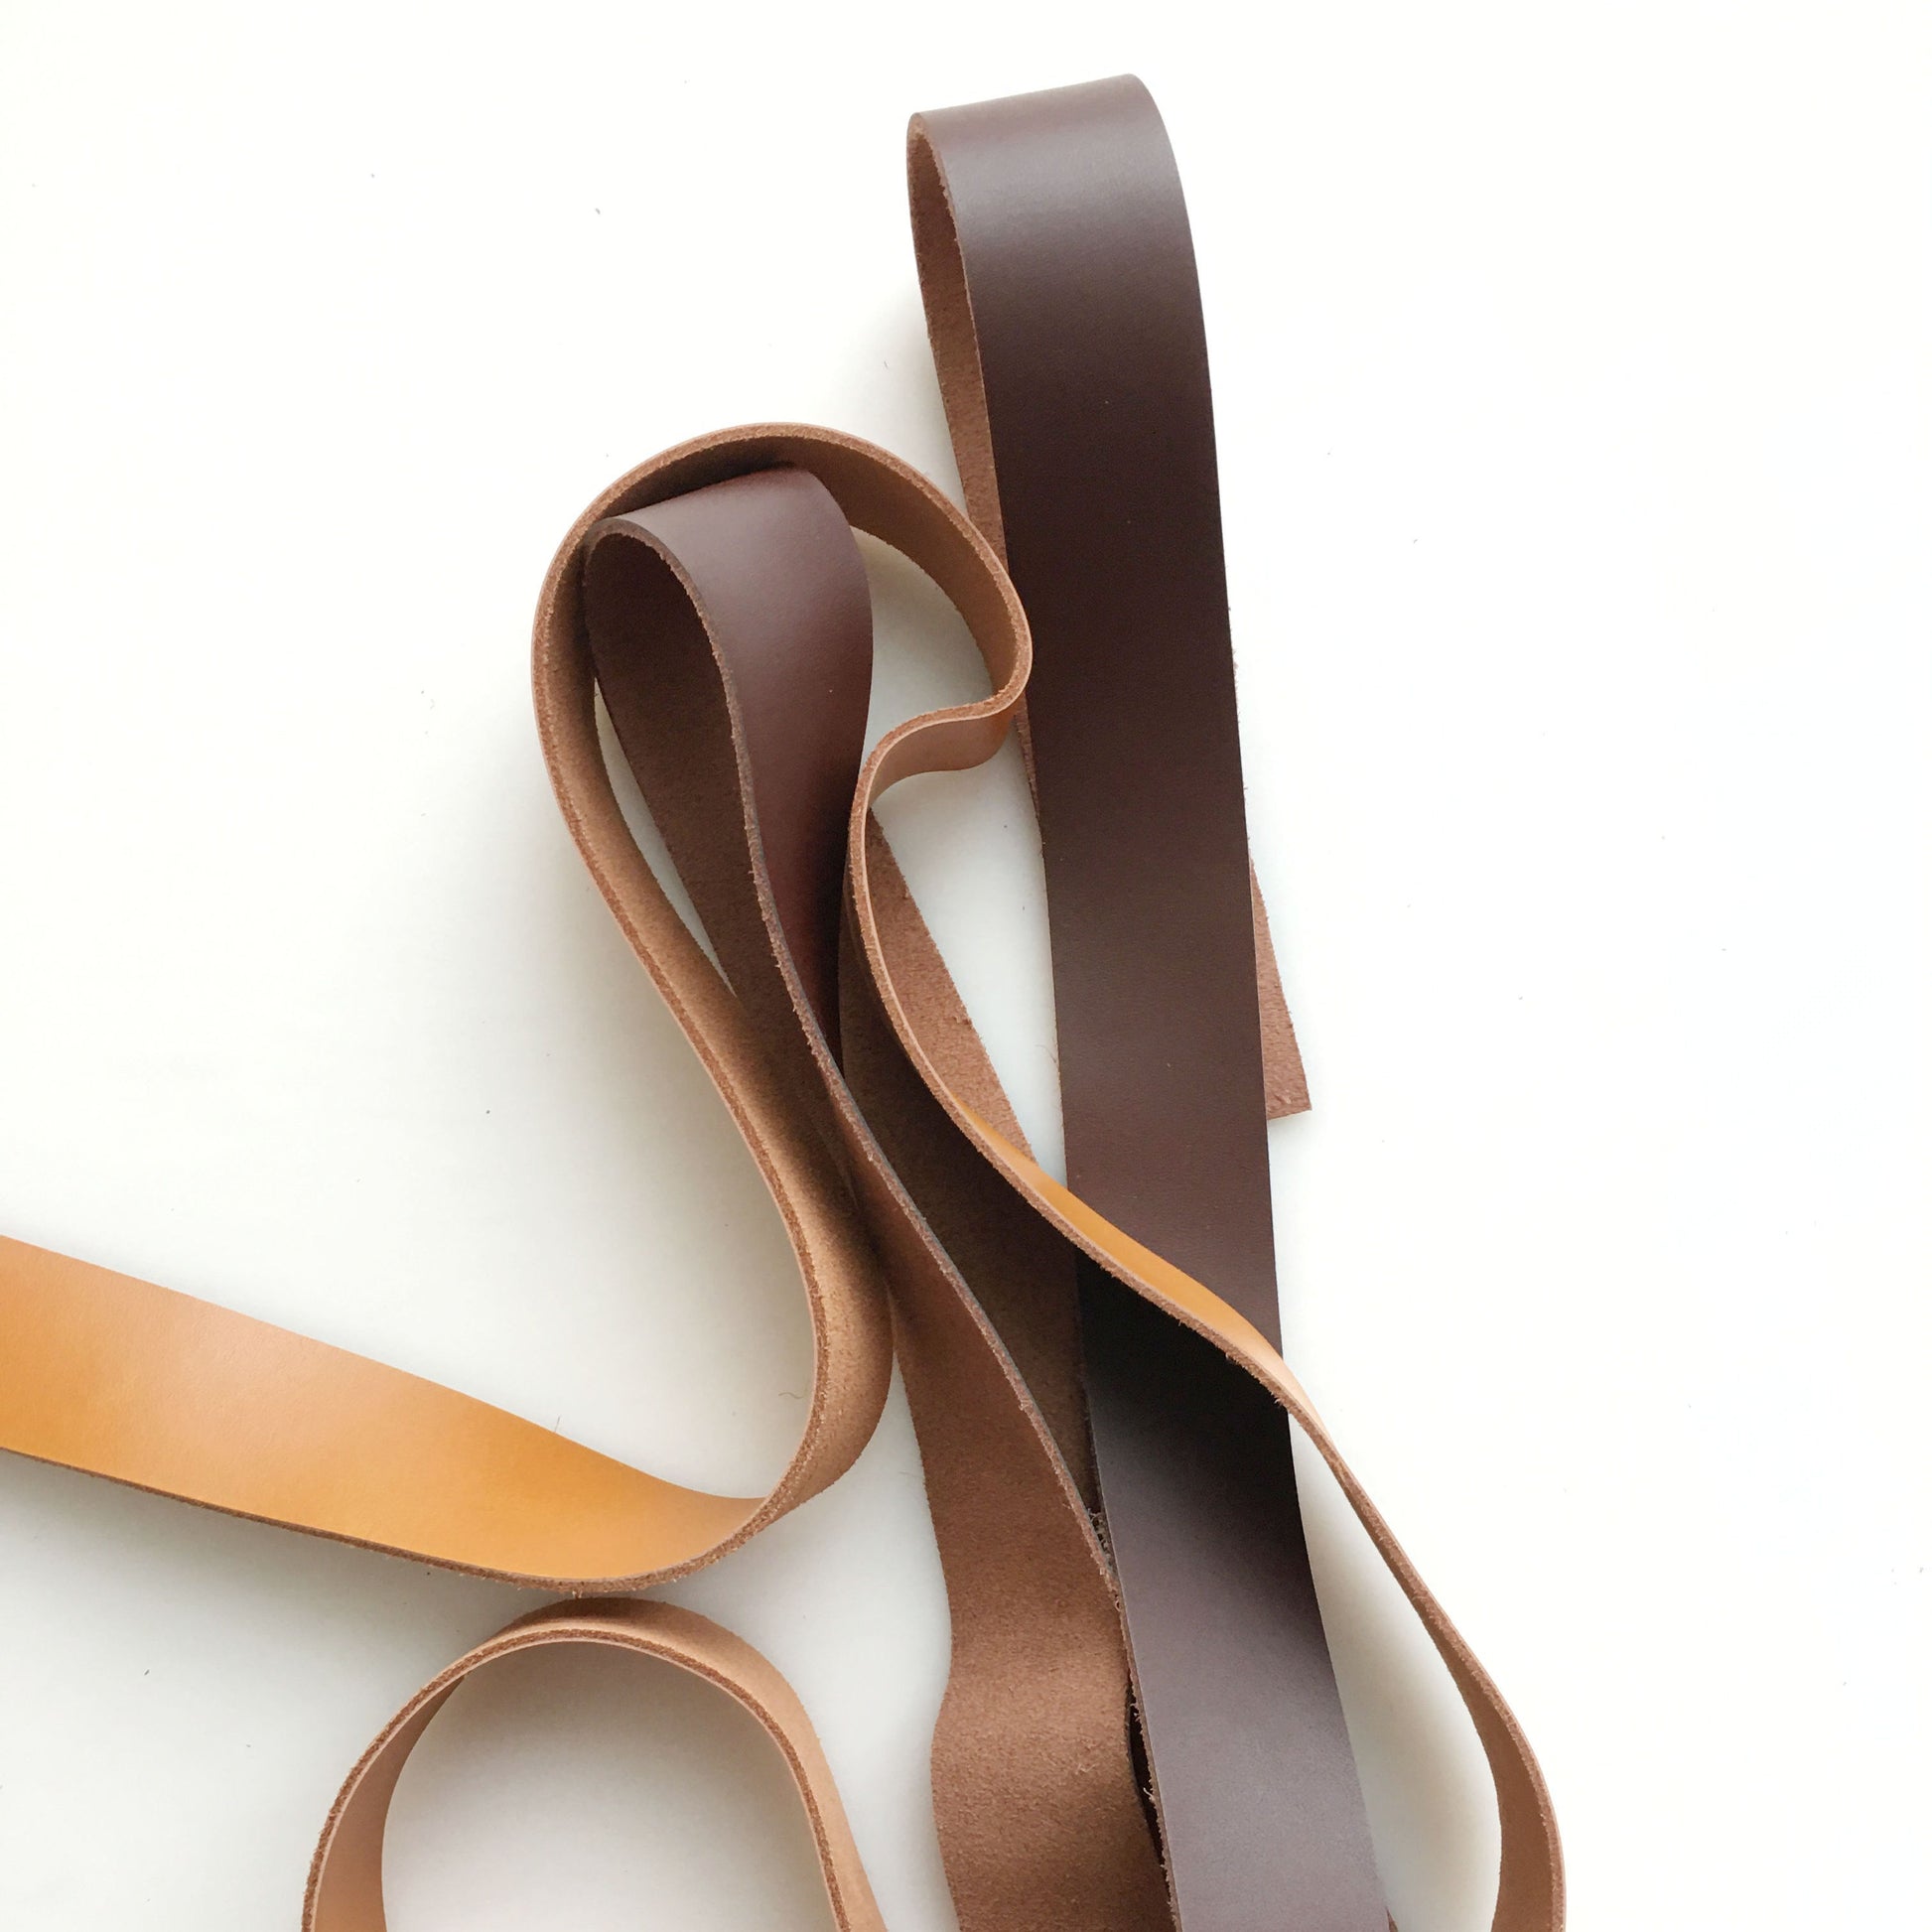 Leather Shoulder Strap With Double-sided Tan Leather 3/4 